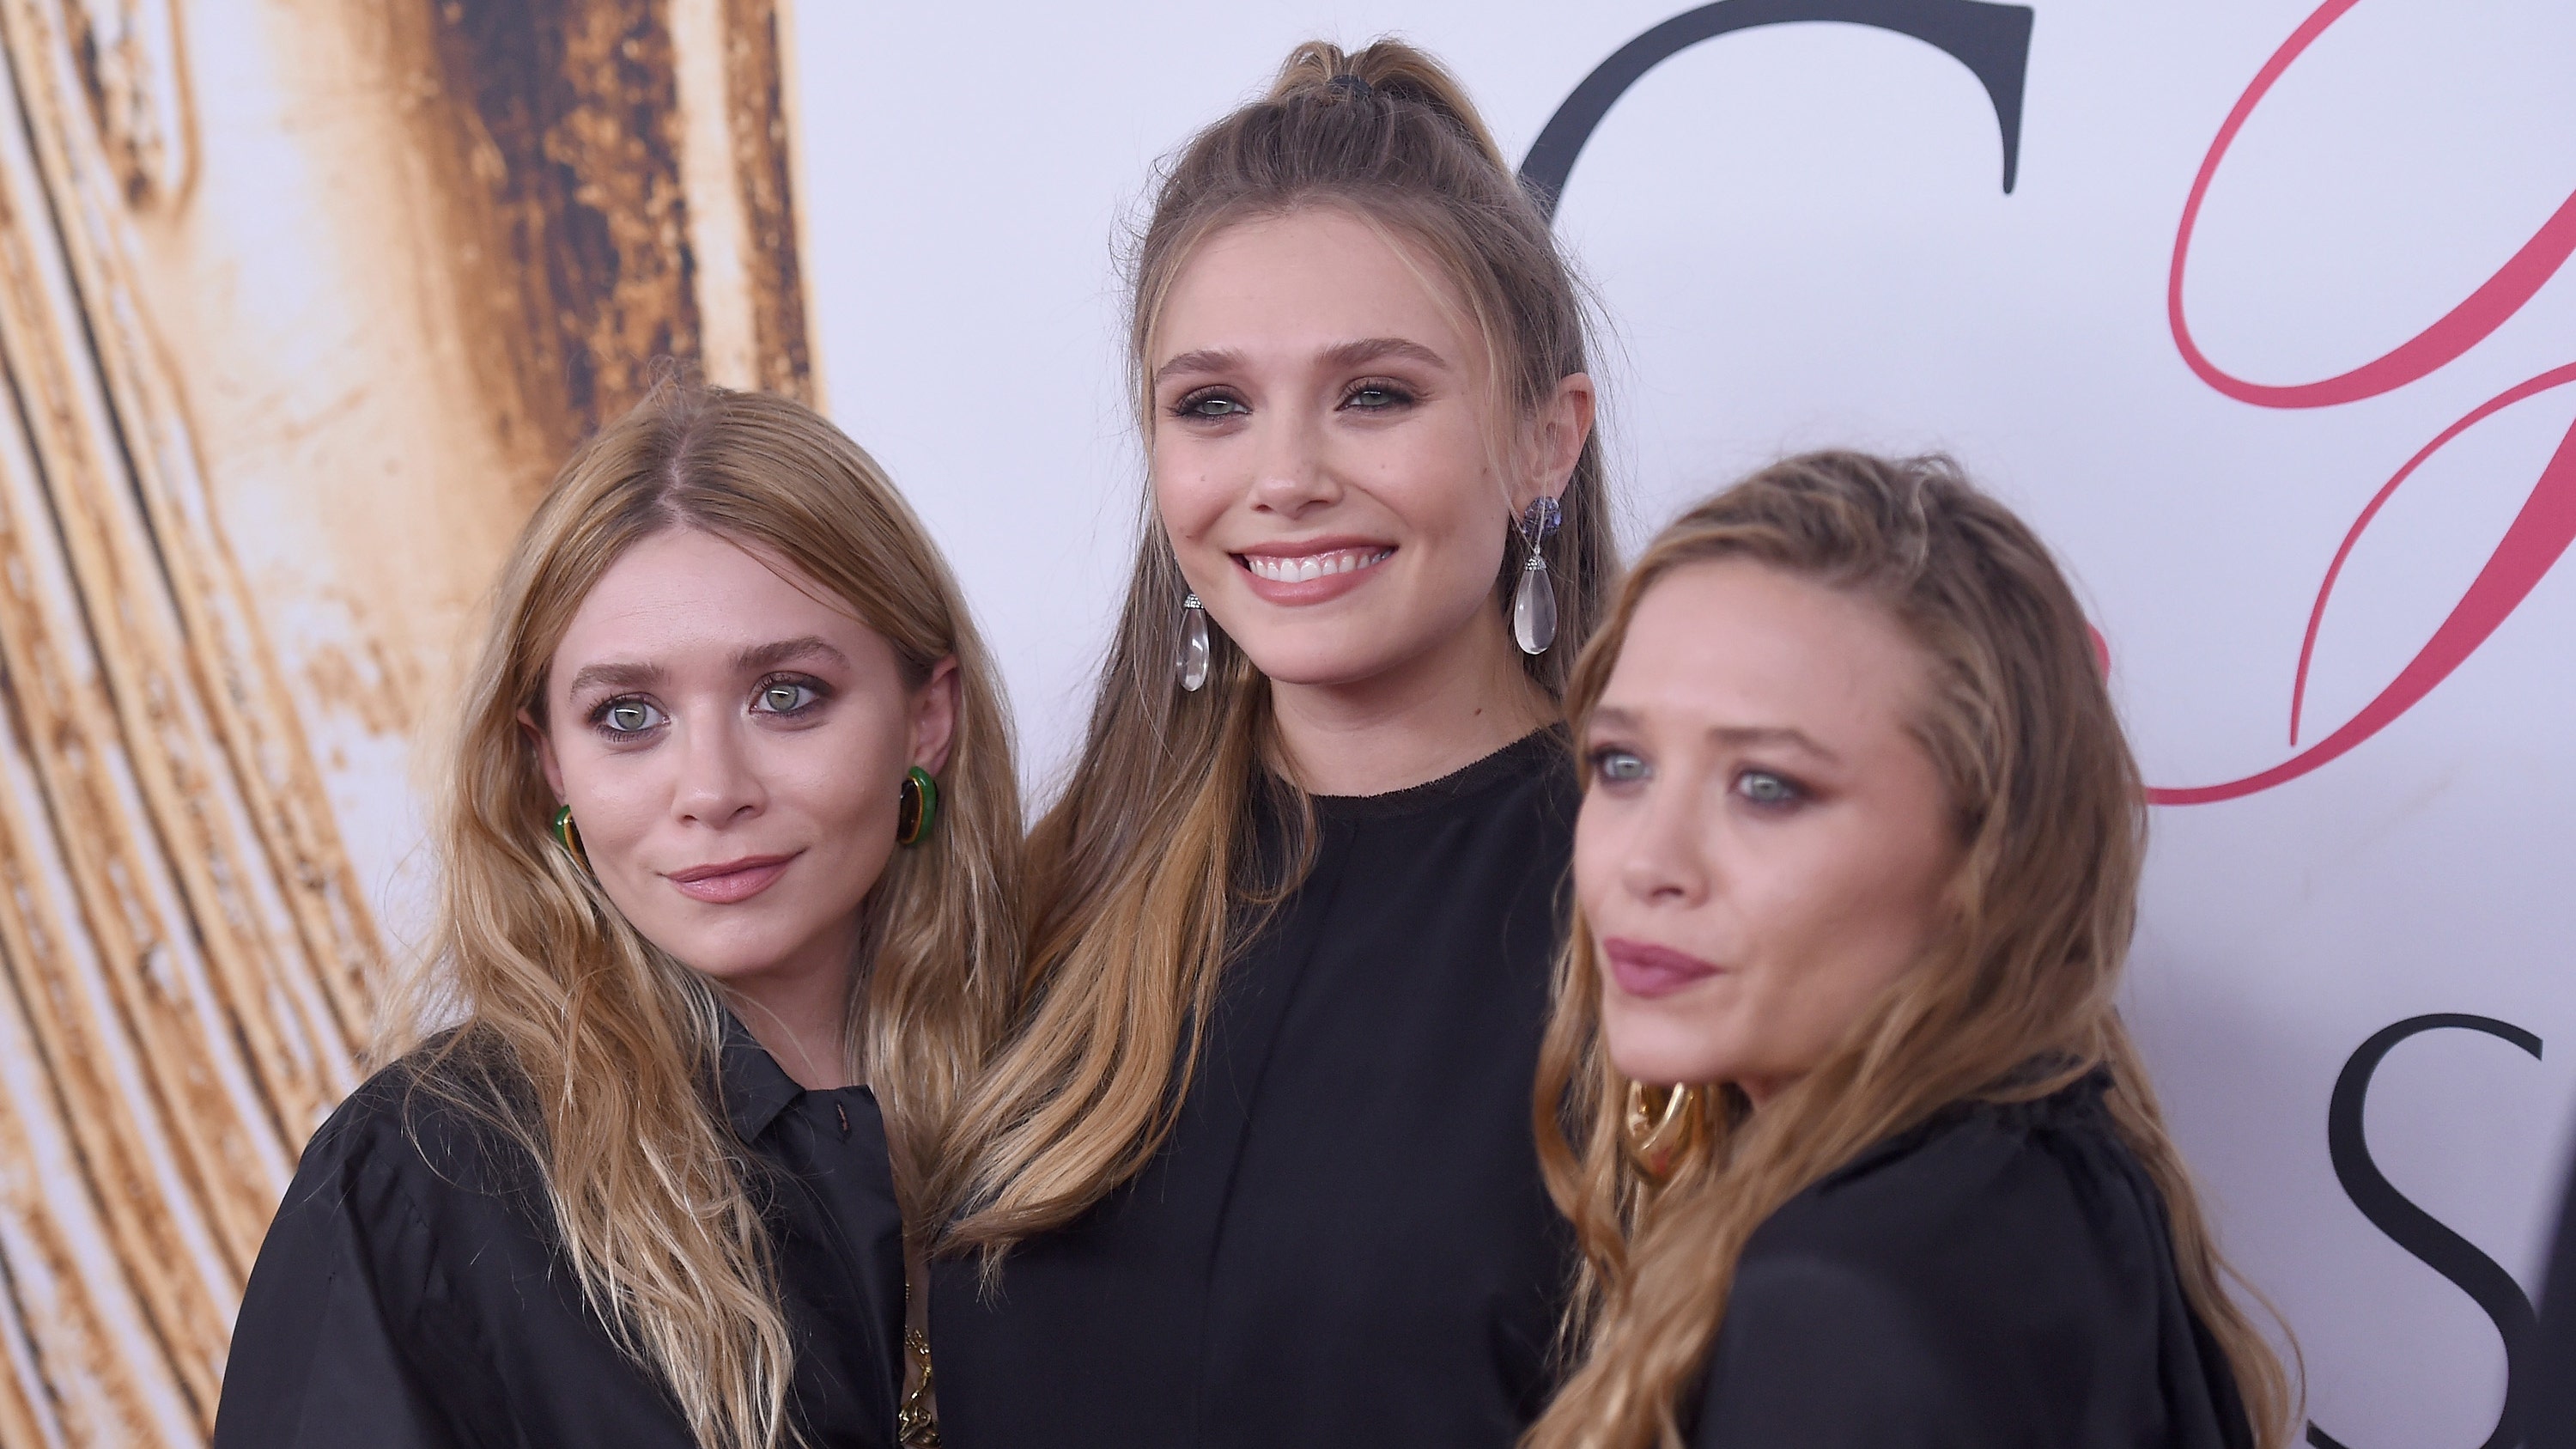 Elizabeth Olsen says growing up with famous sisters was a 'unique' experience - Fox News